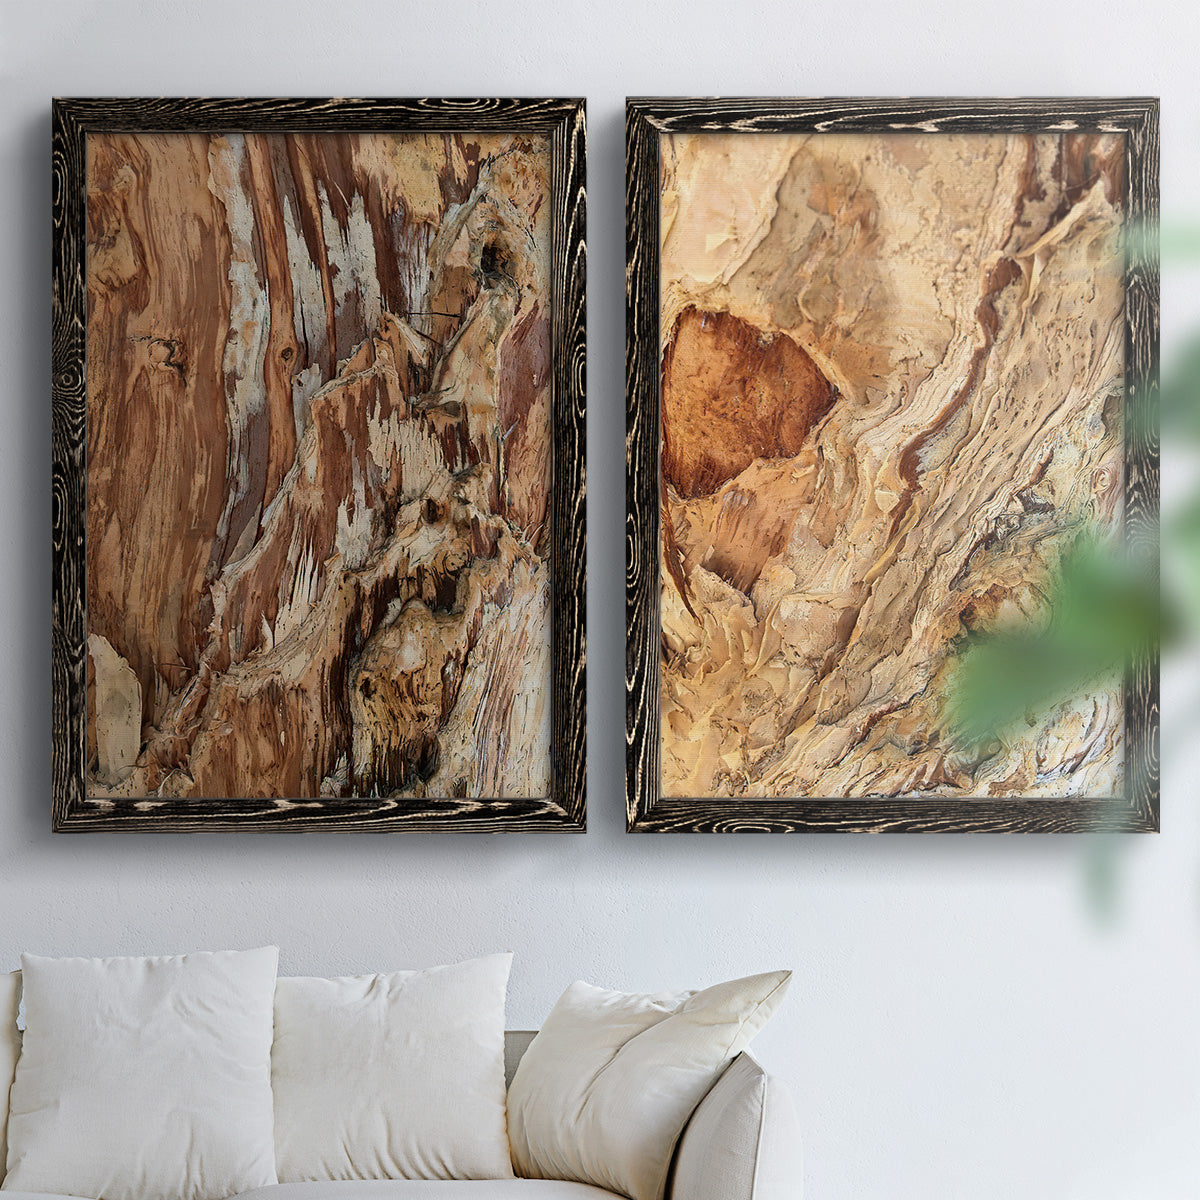 Tree Texture Triptych I - Premium Framed Canvas 2 Piece Set - Ready to Hang